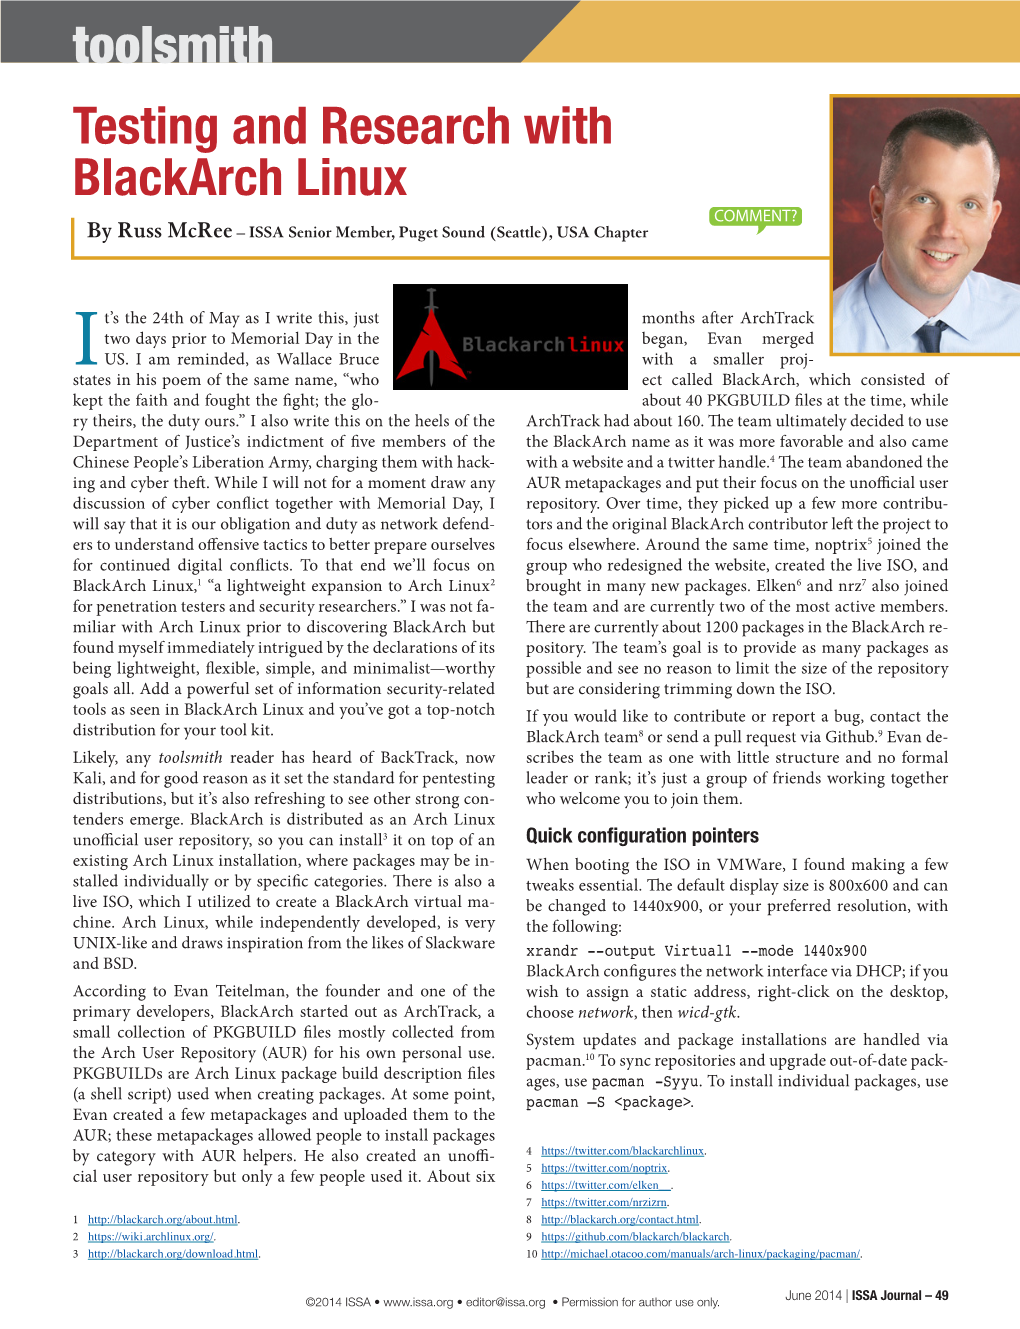 Testing and Research with Blackarch Linux Toolsmith